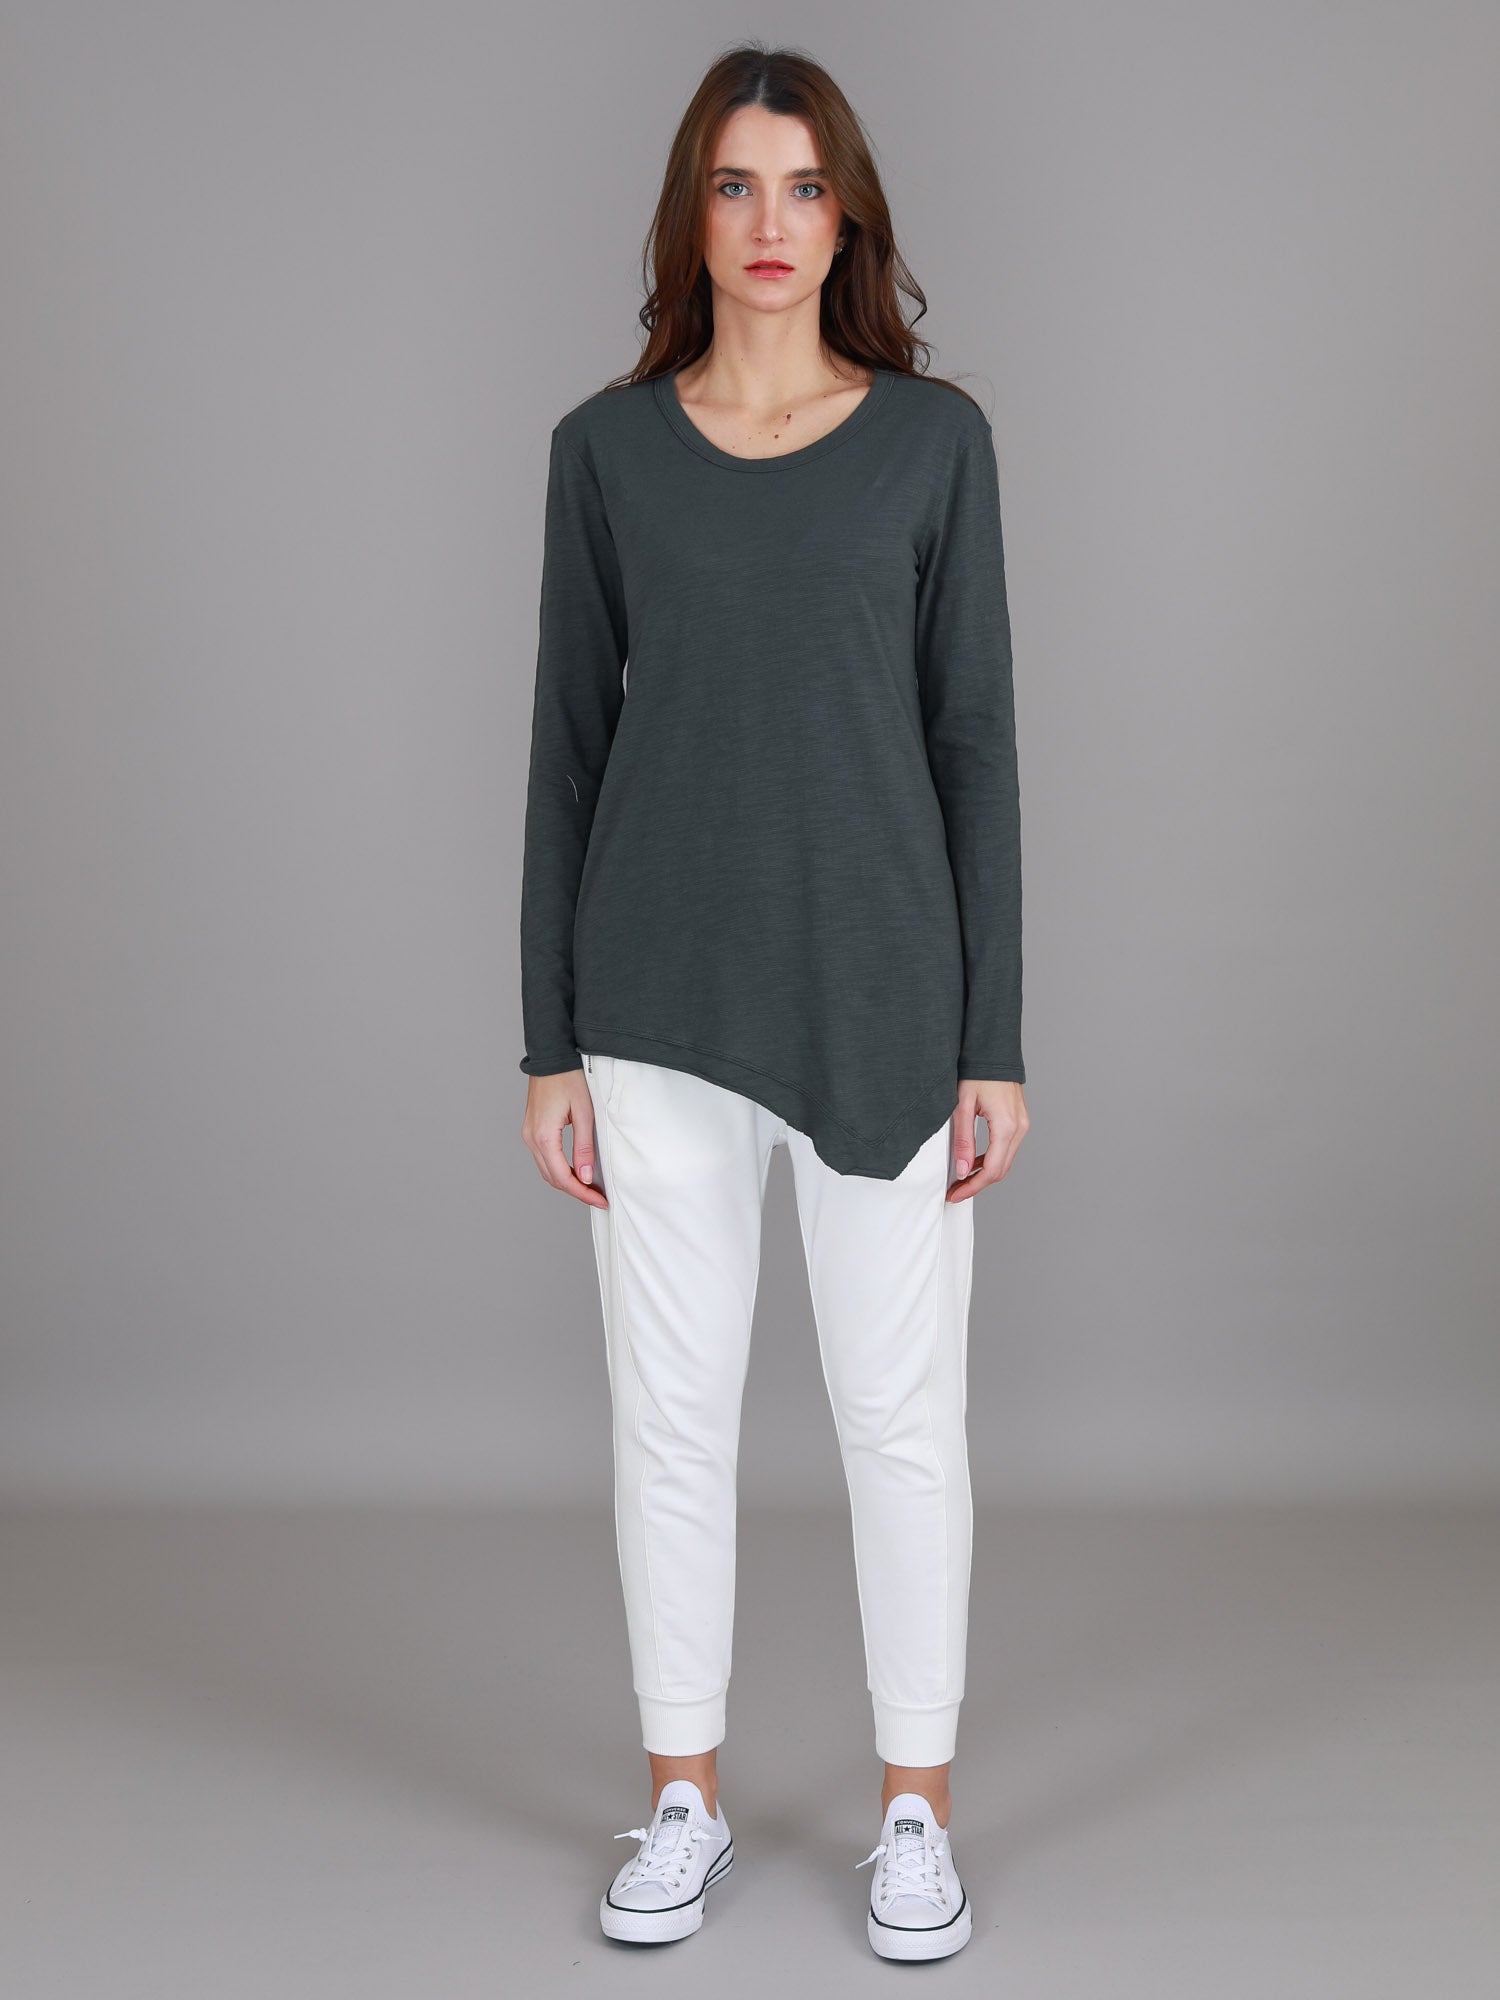 grey top long sleeve #color_charcoal